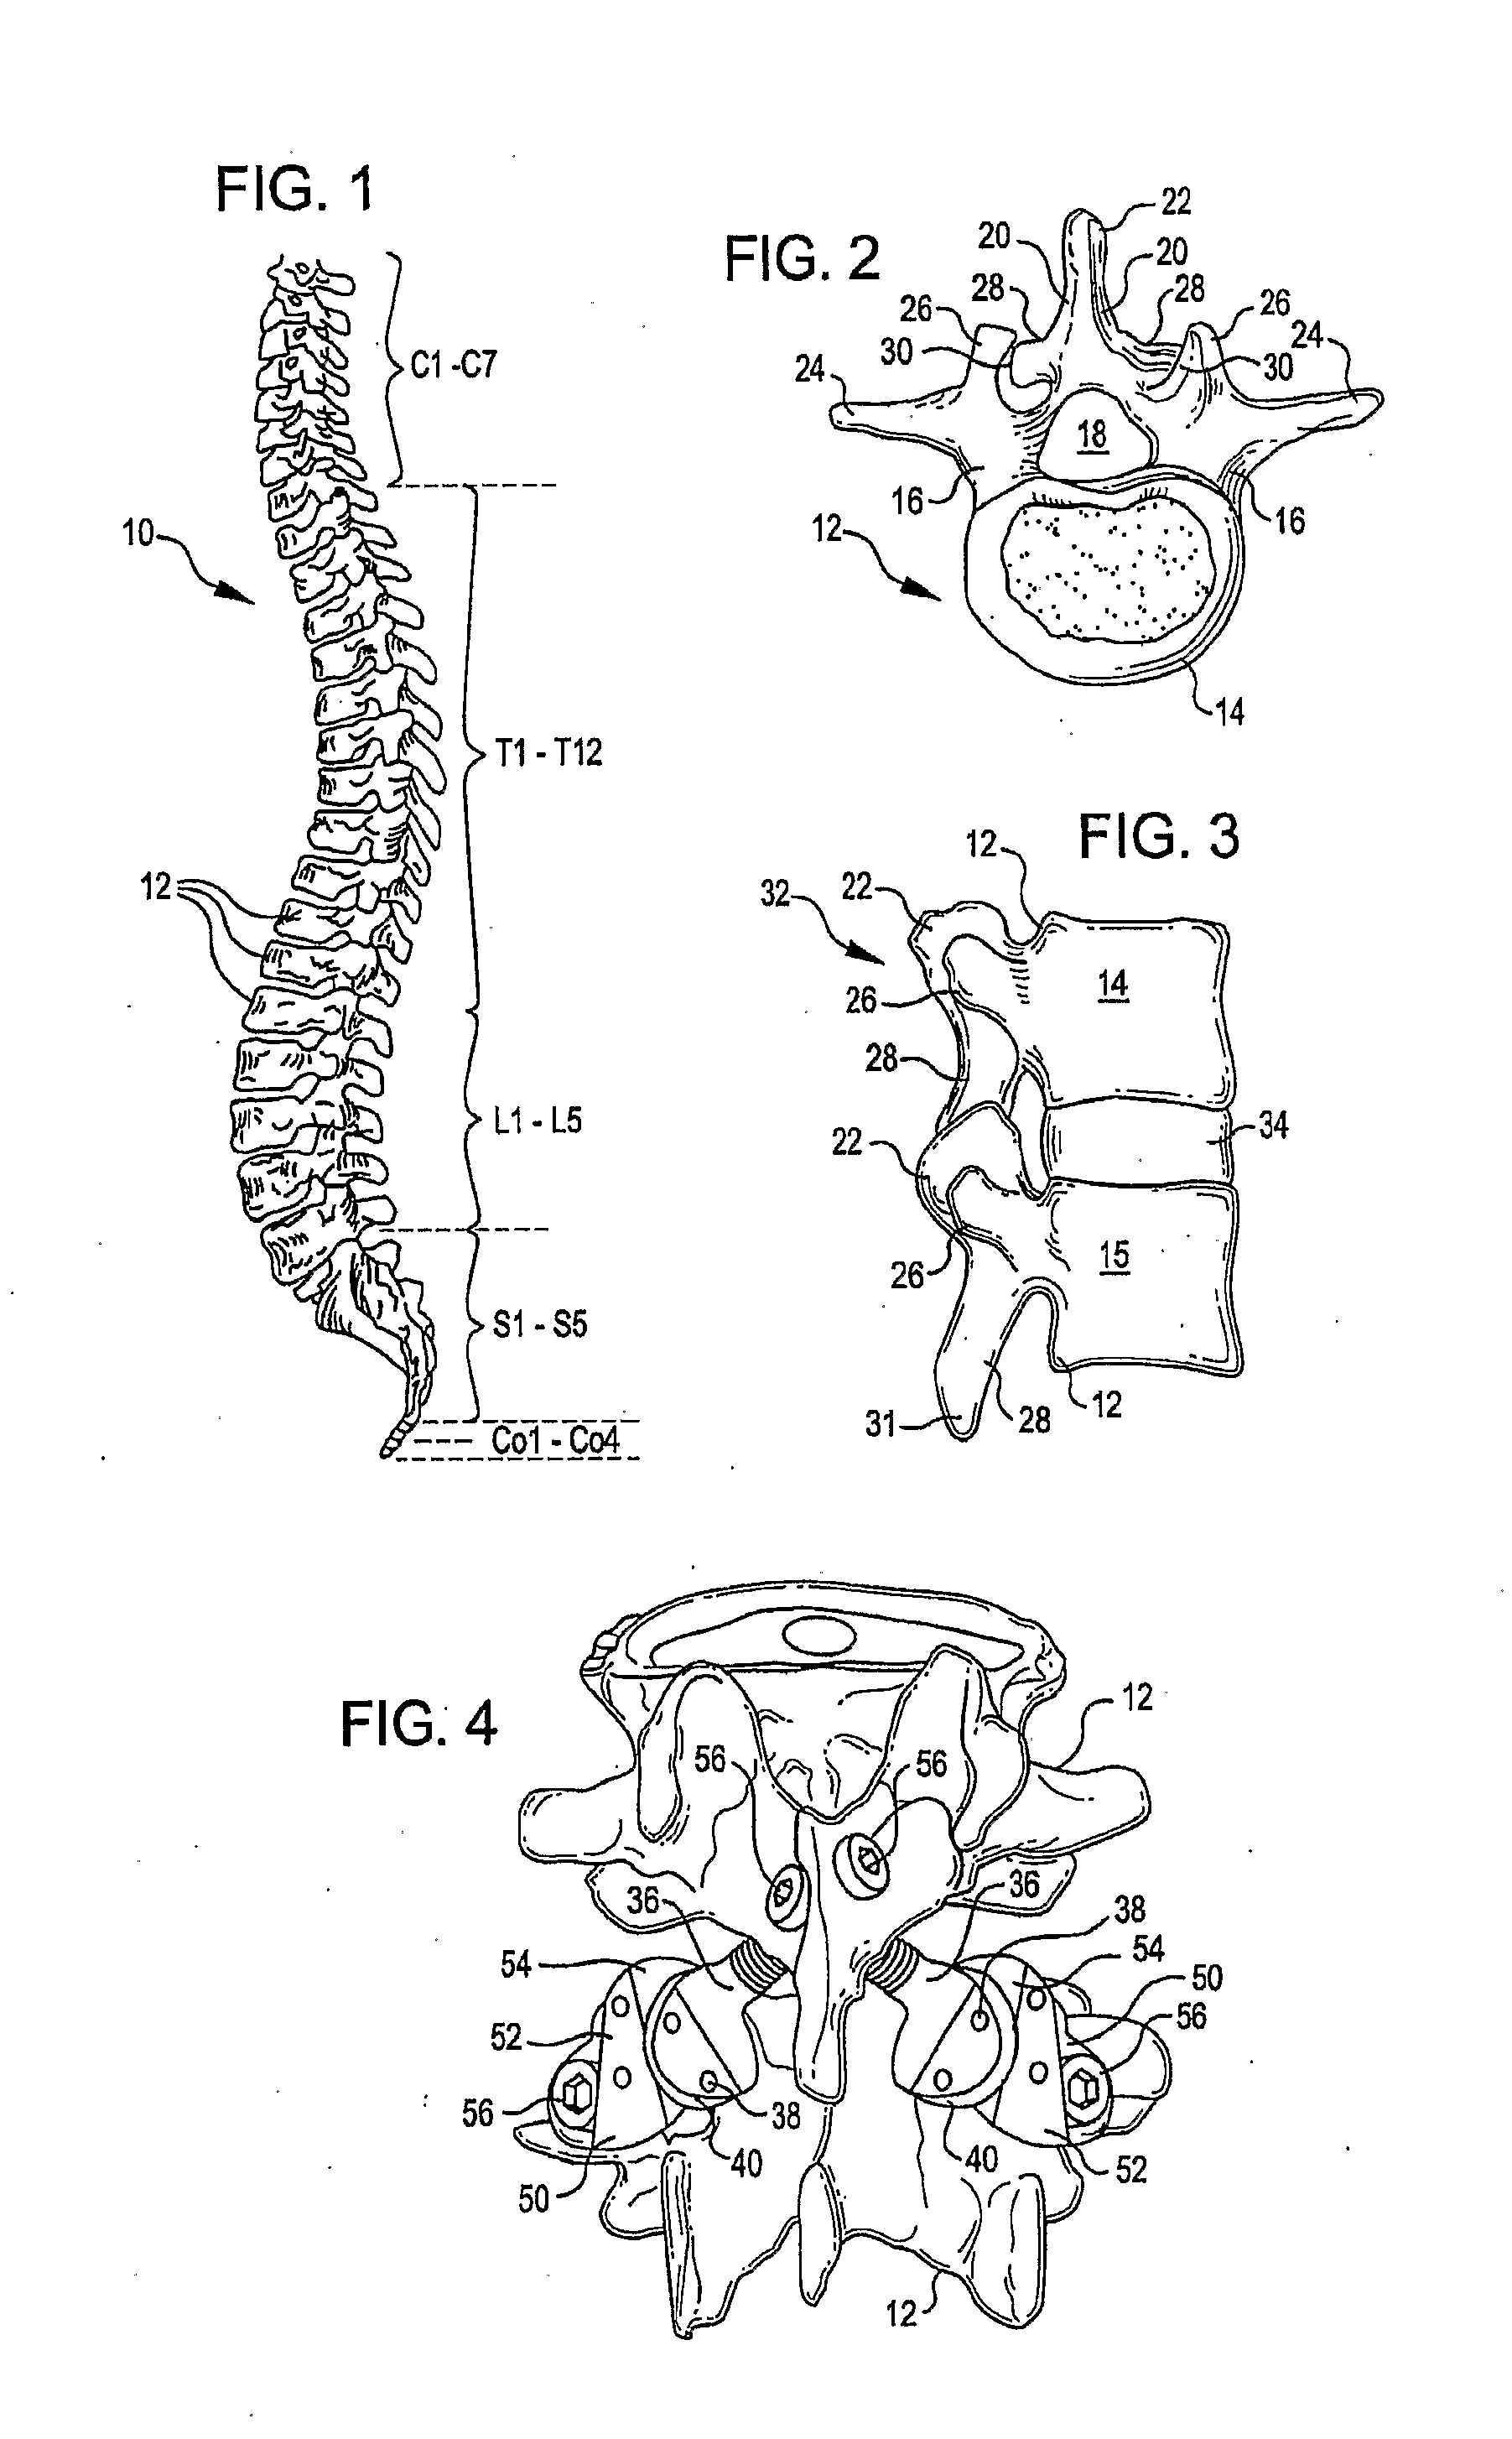 Crossbar spinal prosthesis having a modular design and systems for treating spinal pathologies